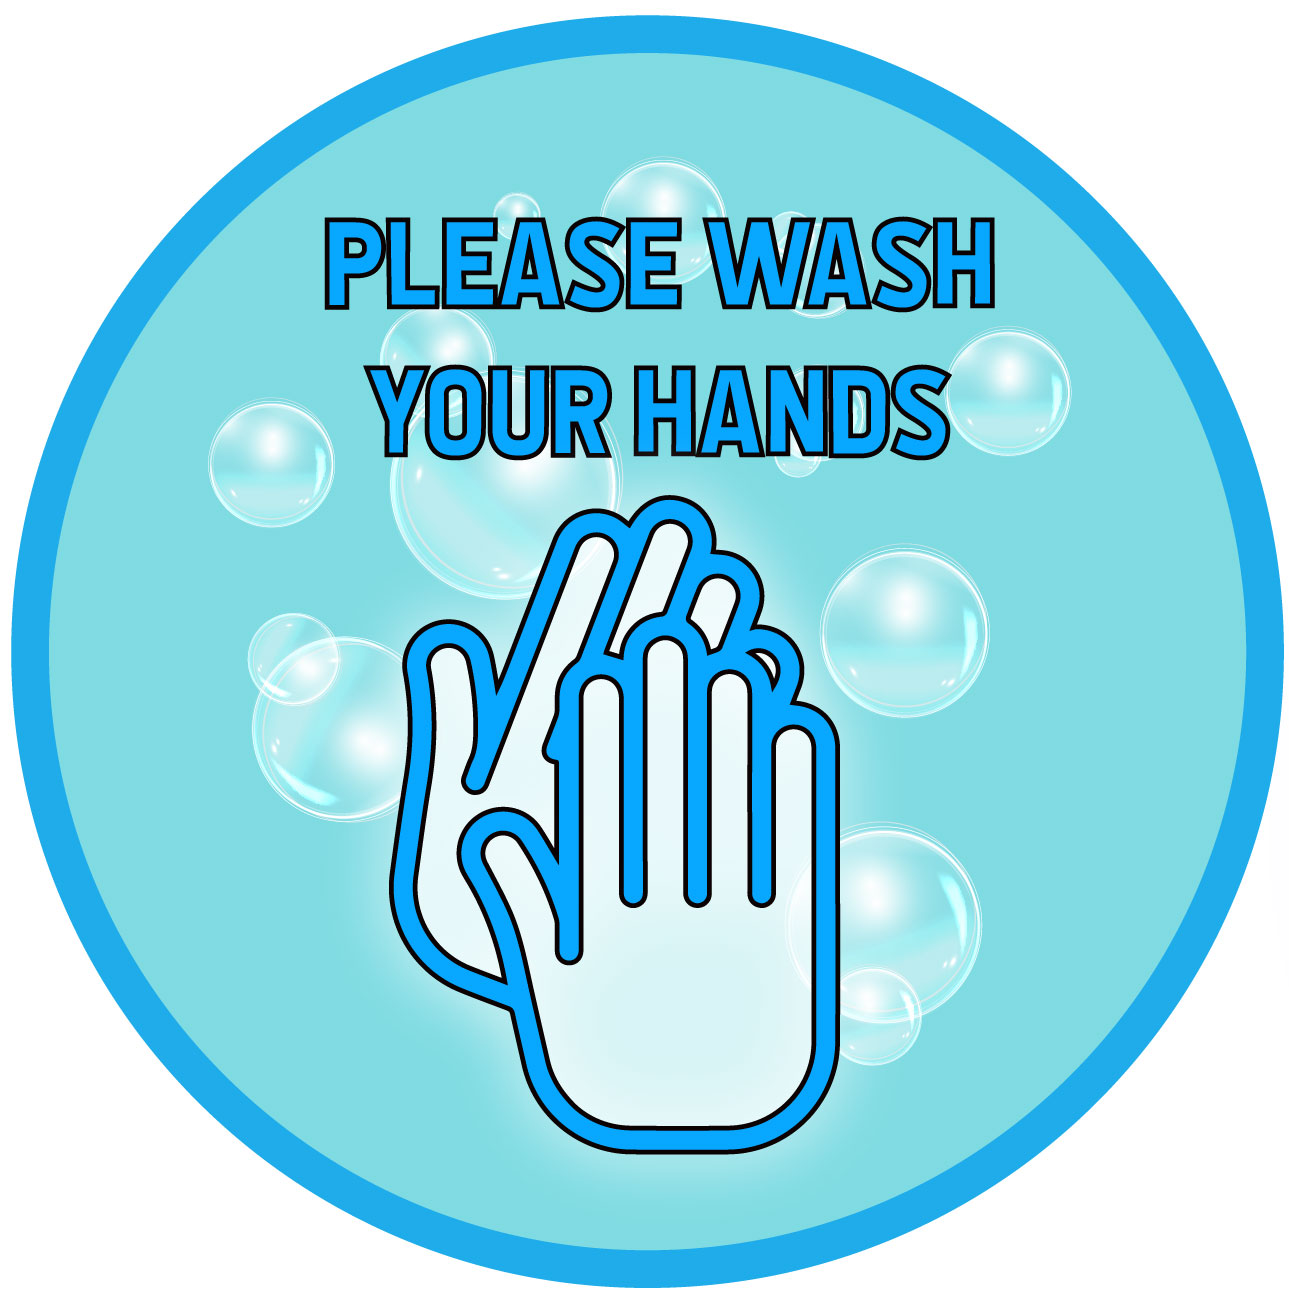 5 Pack - Please Wash Your Hands Wall or Floor Graphic  12" diameter (adhesive vinyl) 